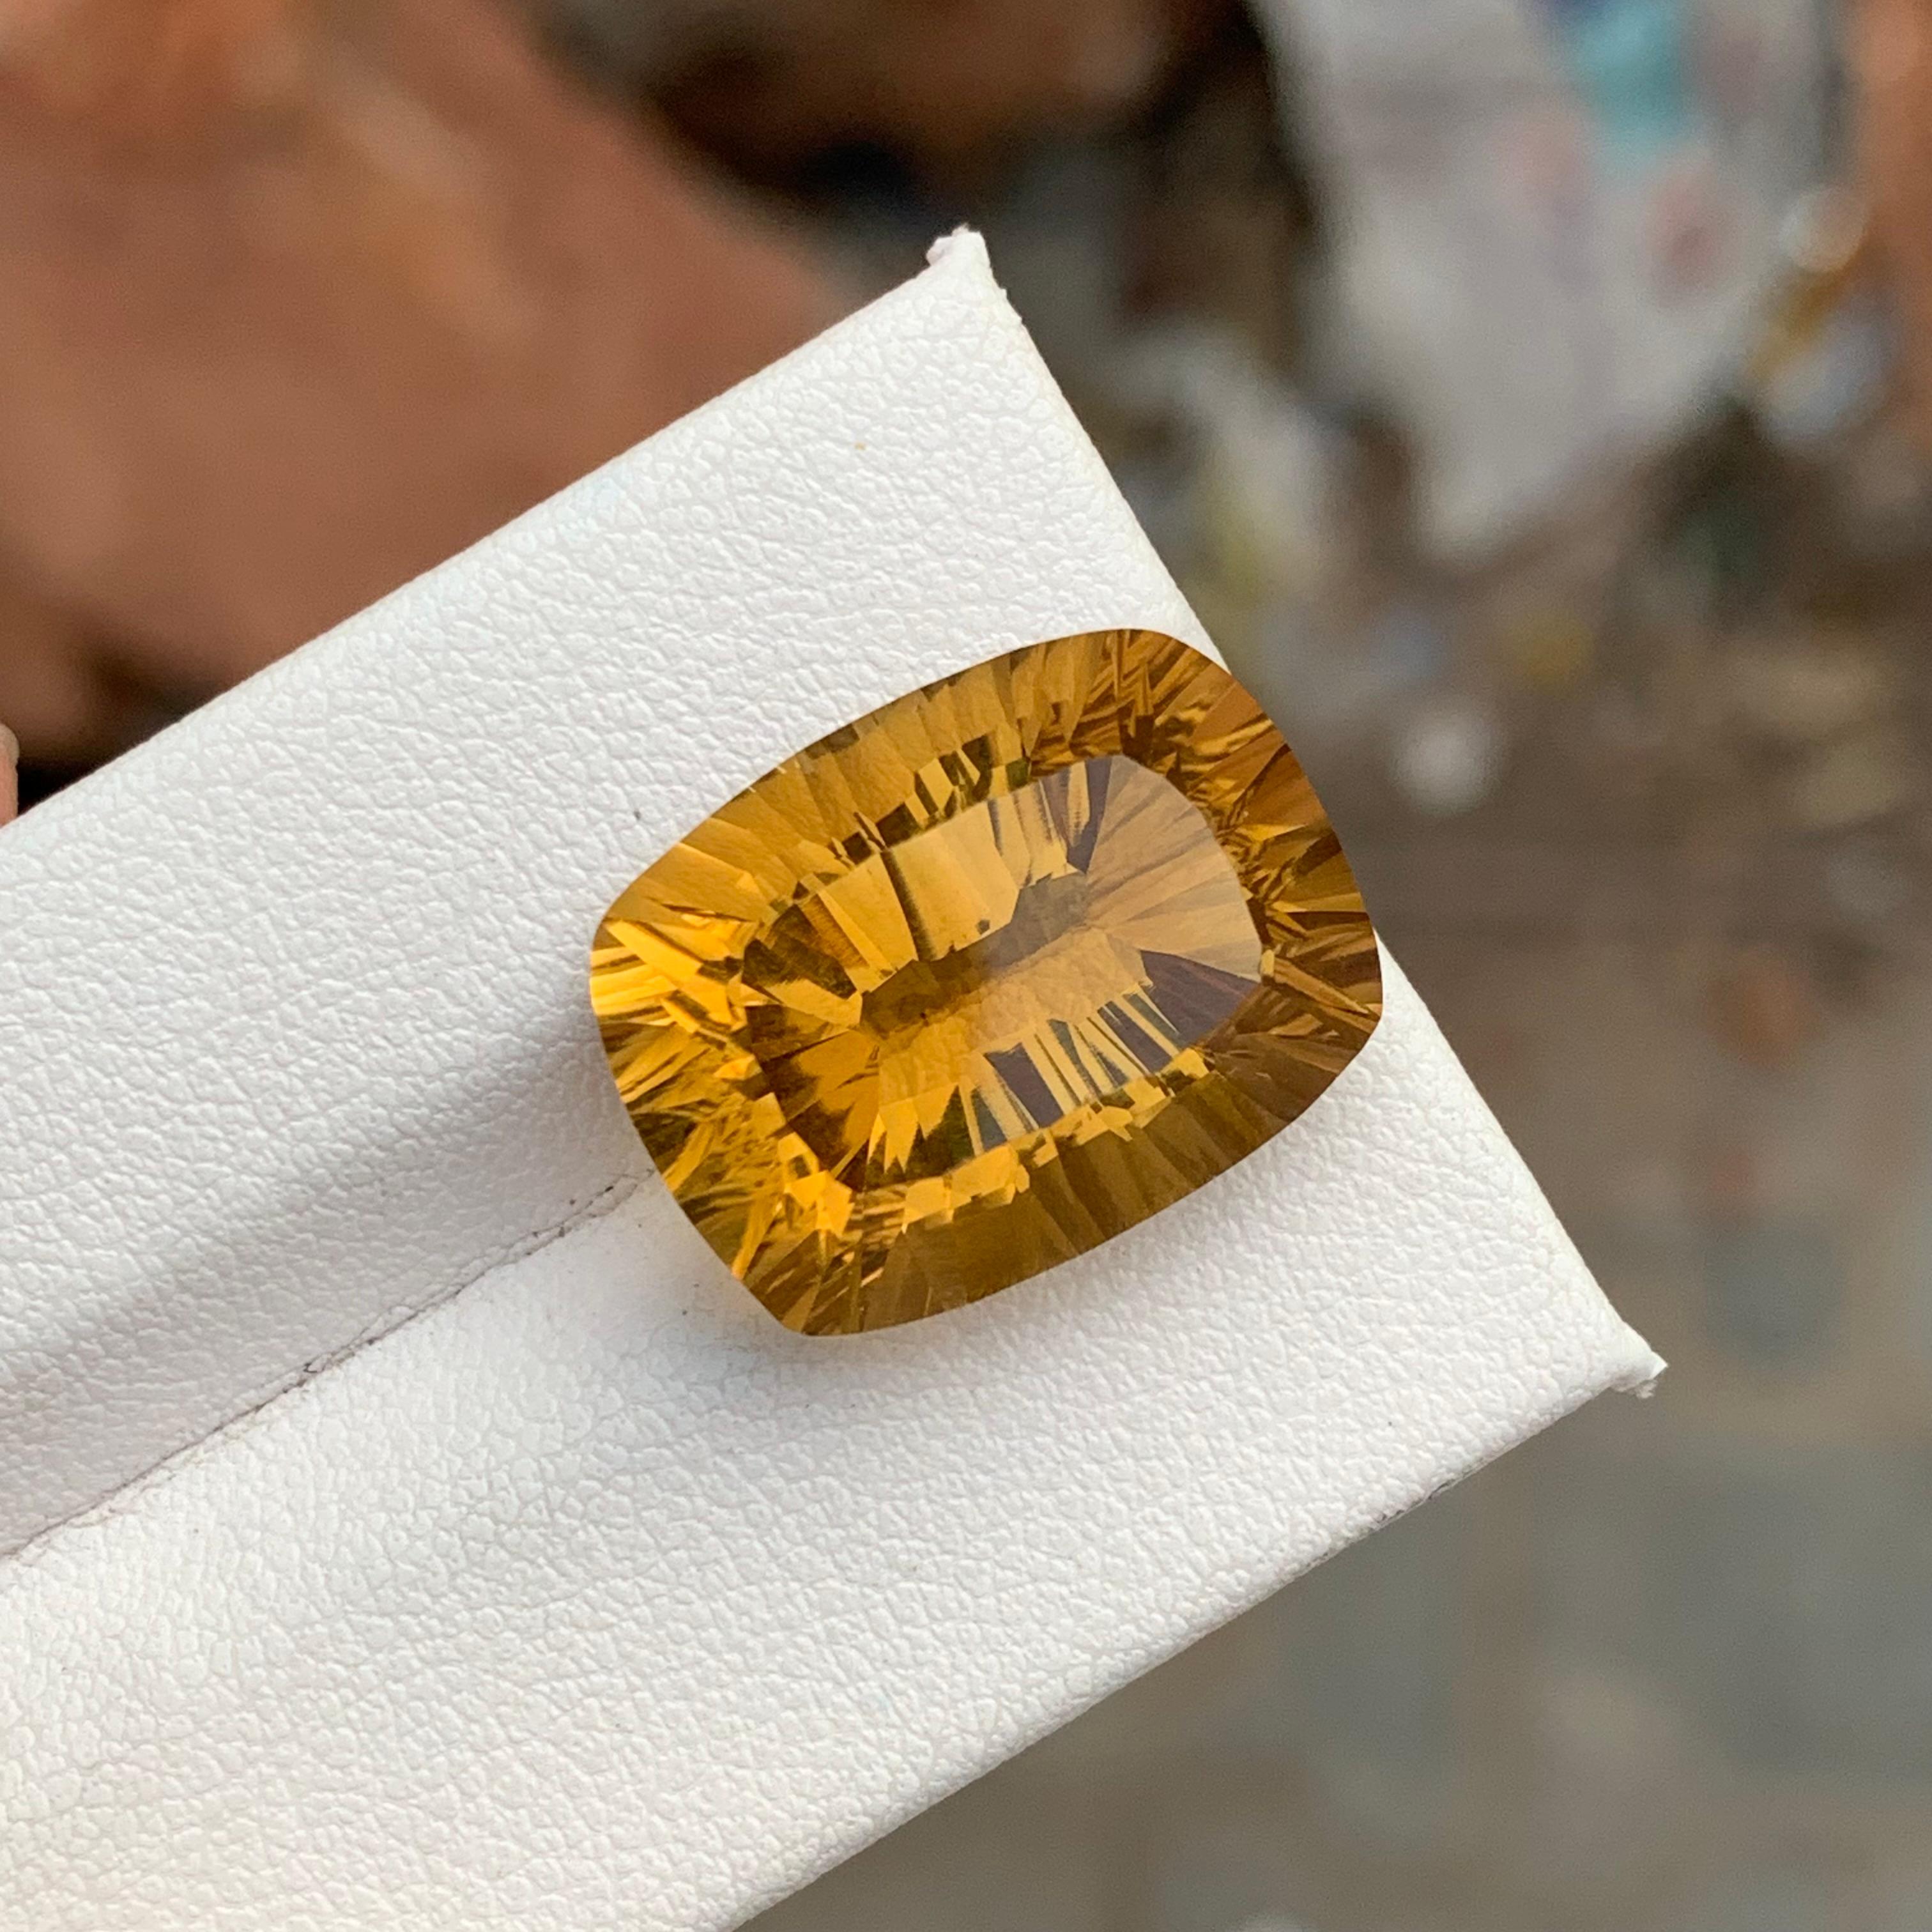 Loose Citrine
Weight: 18.40 Carats
Dimension: 18.7 x 14.3 x 10.9 Mm
Origin: Brazil
Colour: Yellow
Treatment: Non
Certficate: On Demand
Shape: Emerald 


Citrine, a radiant and versatile gemstone, enchants with its warm, golden hues and remarkable